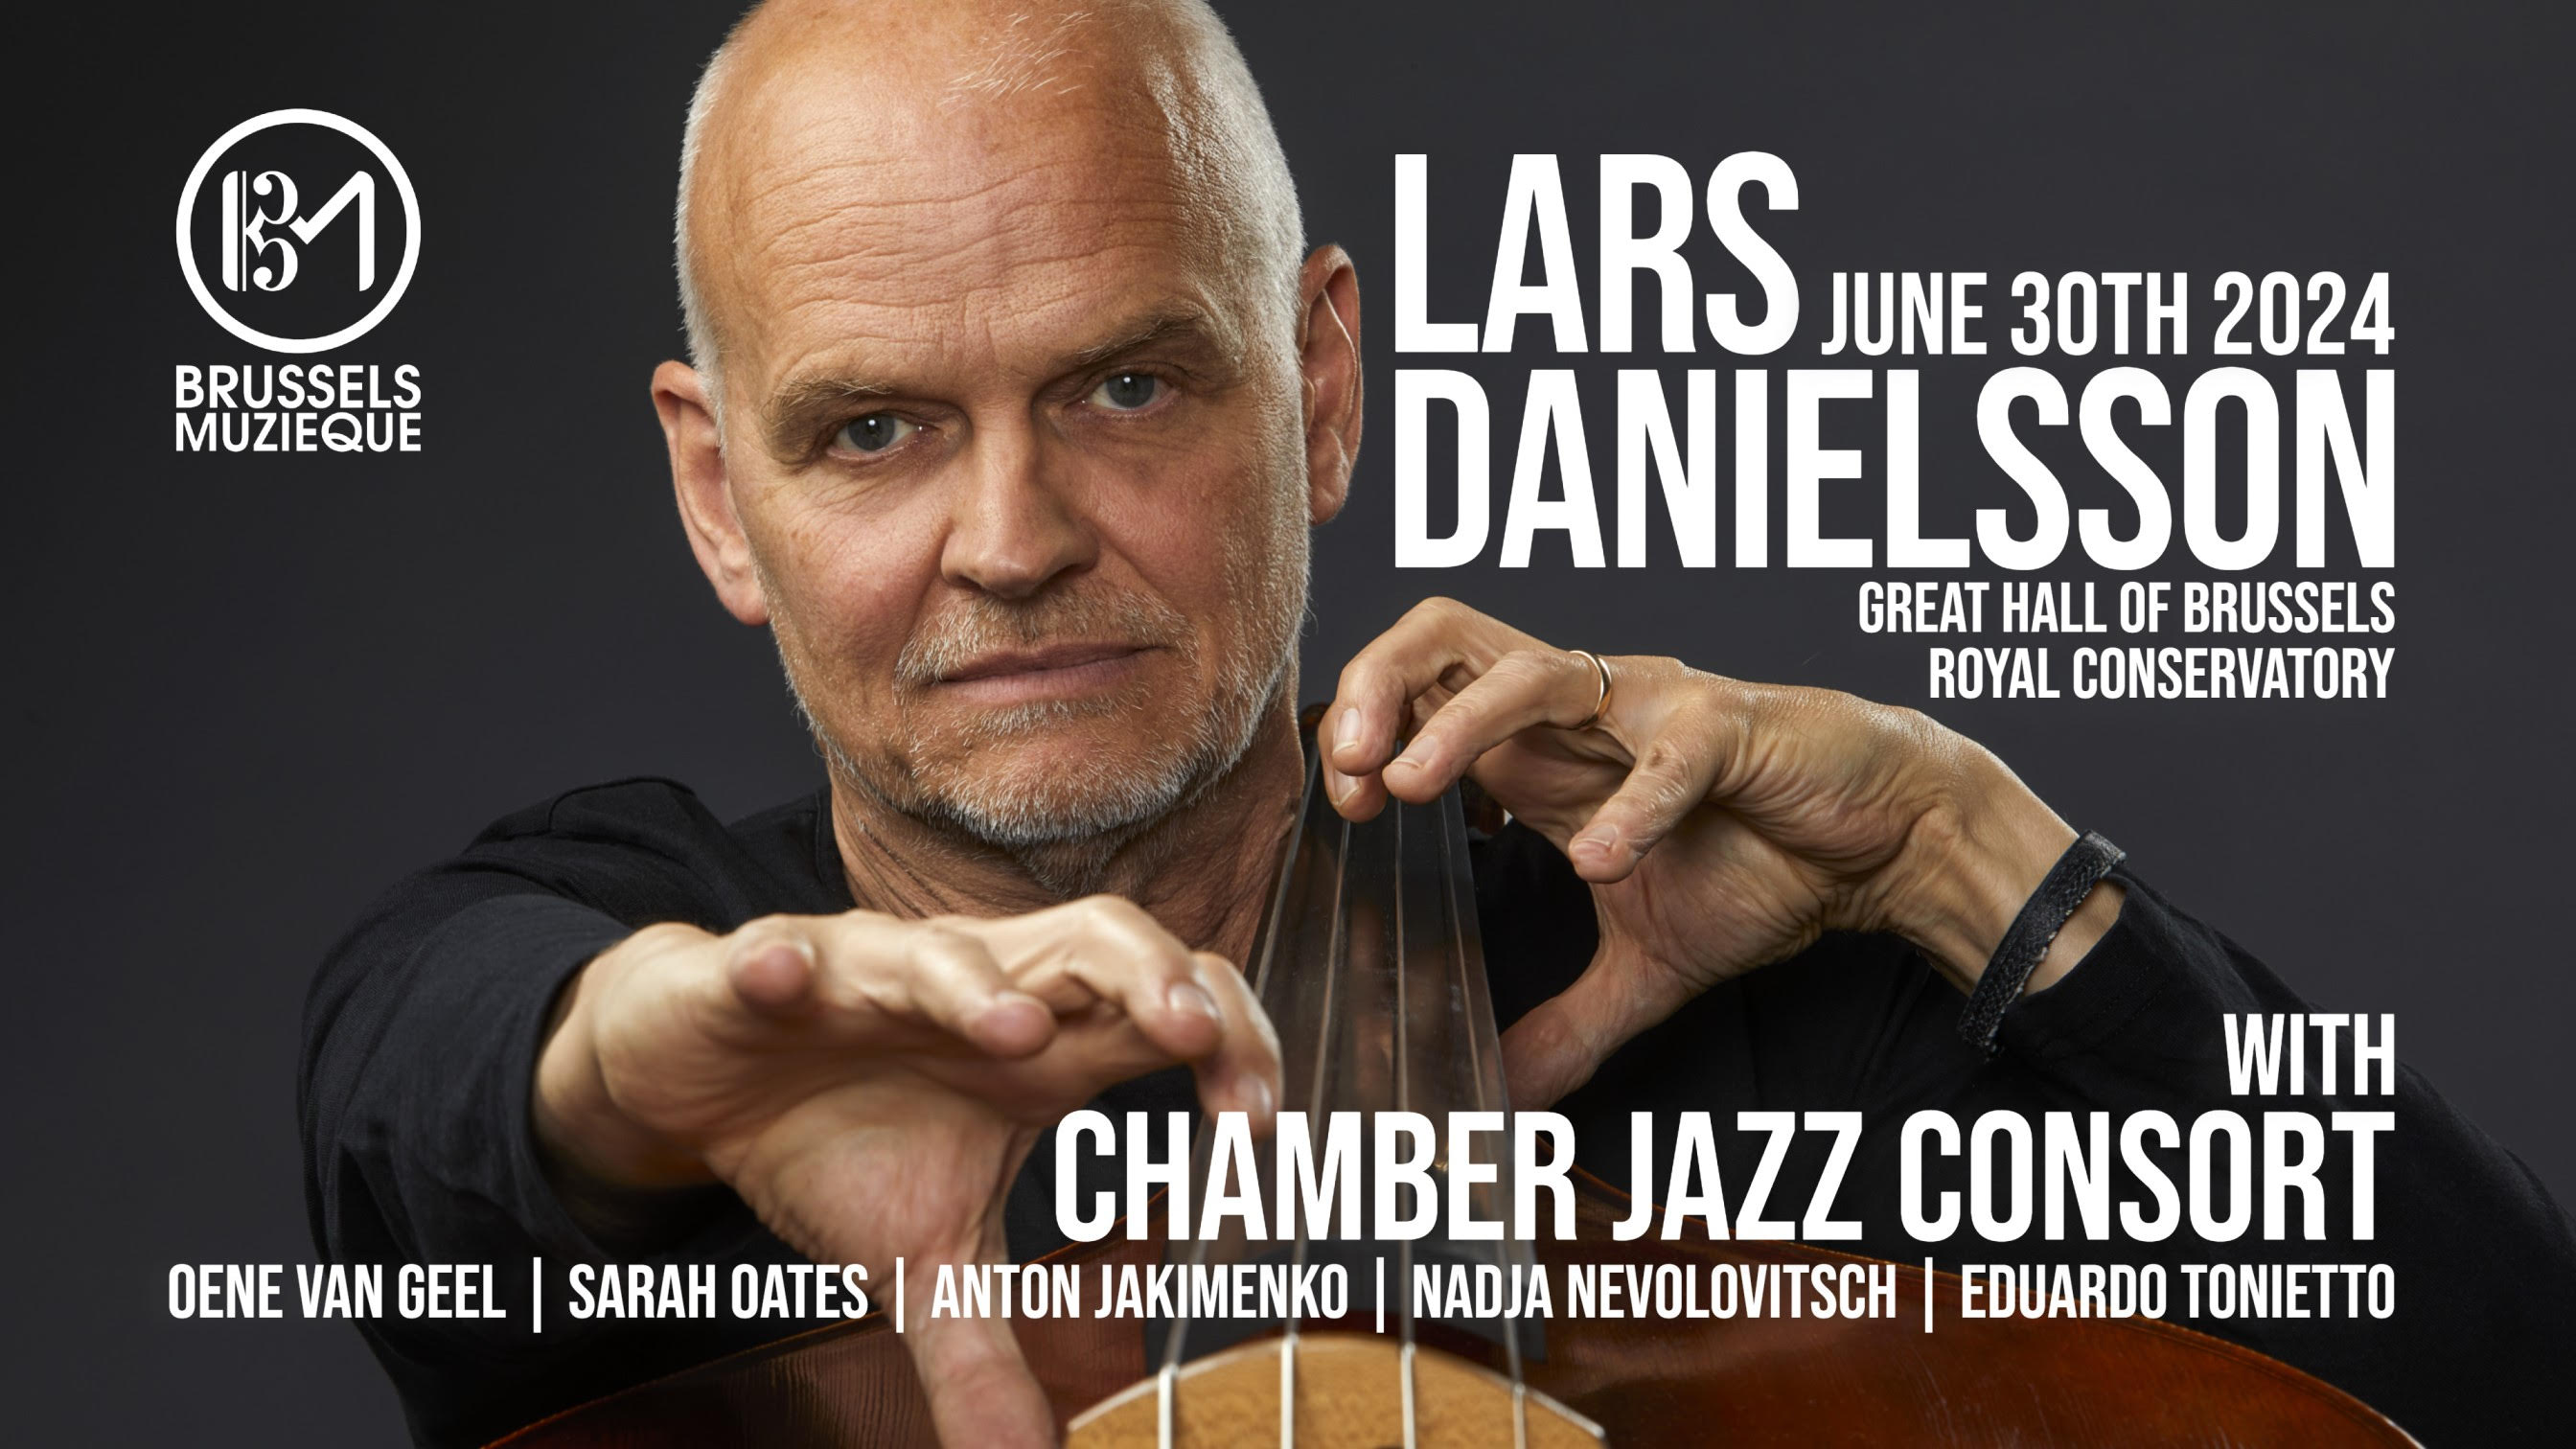 Win tickets to Brussels Muzieque concert by jazz maestro Lars Danielsson on 30 June